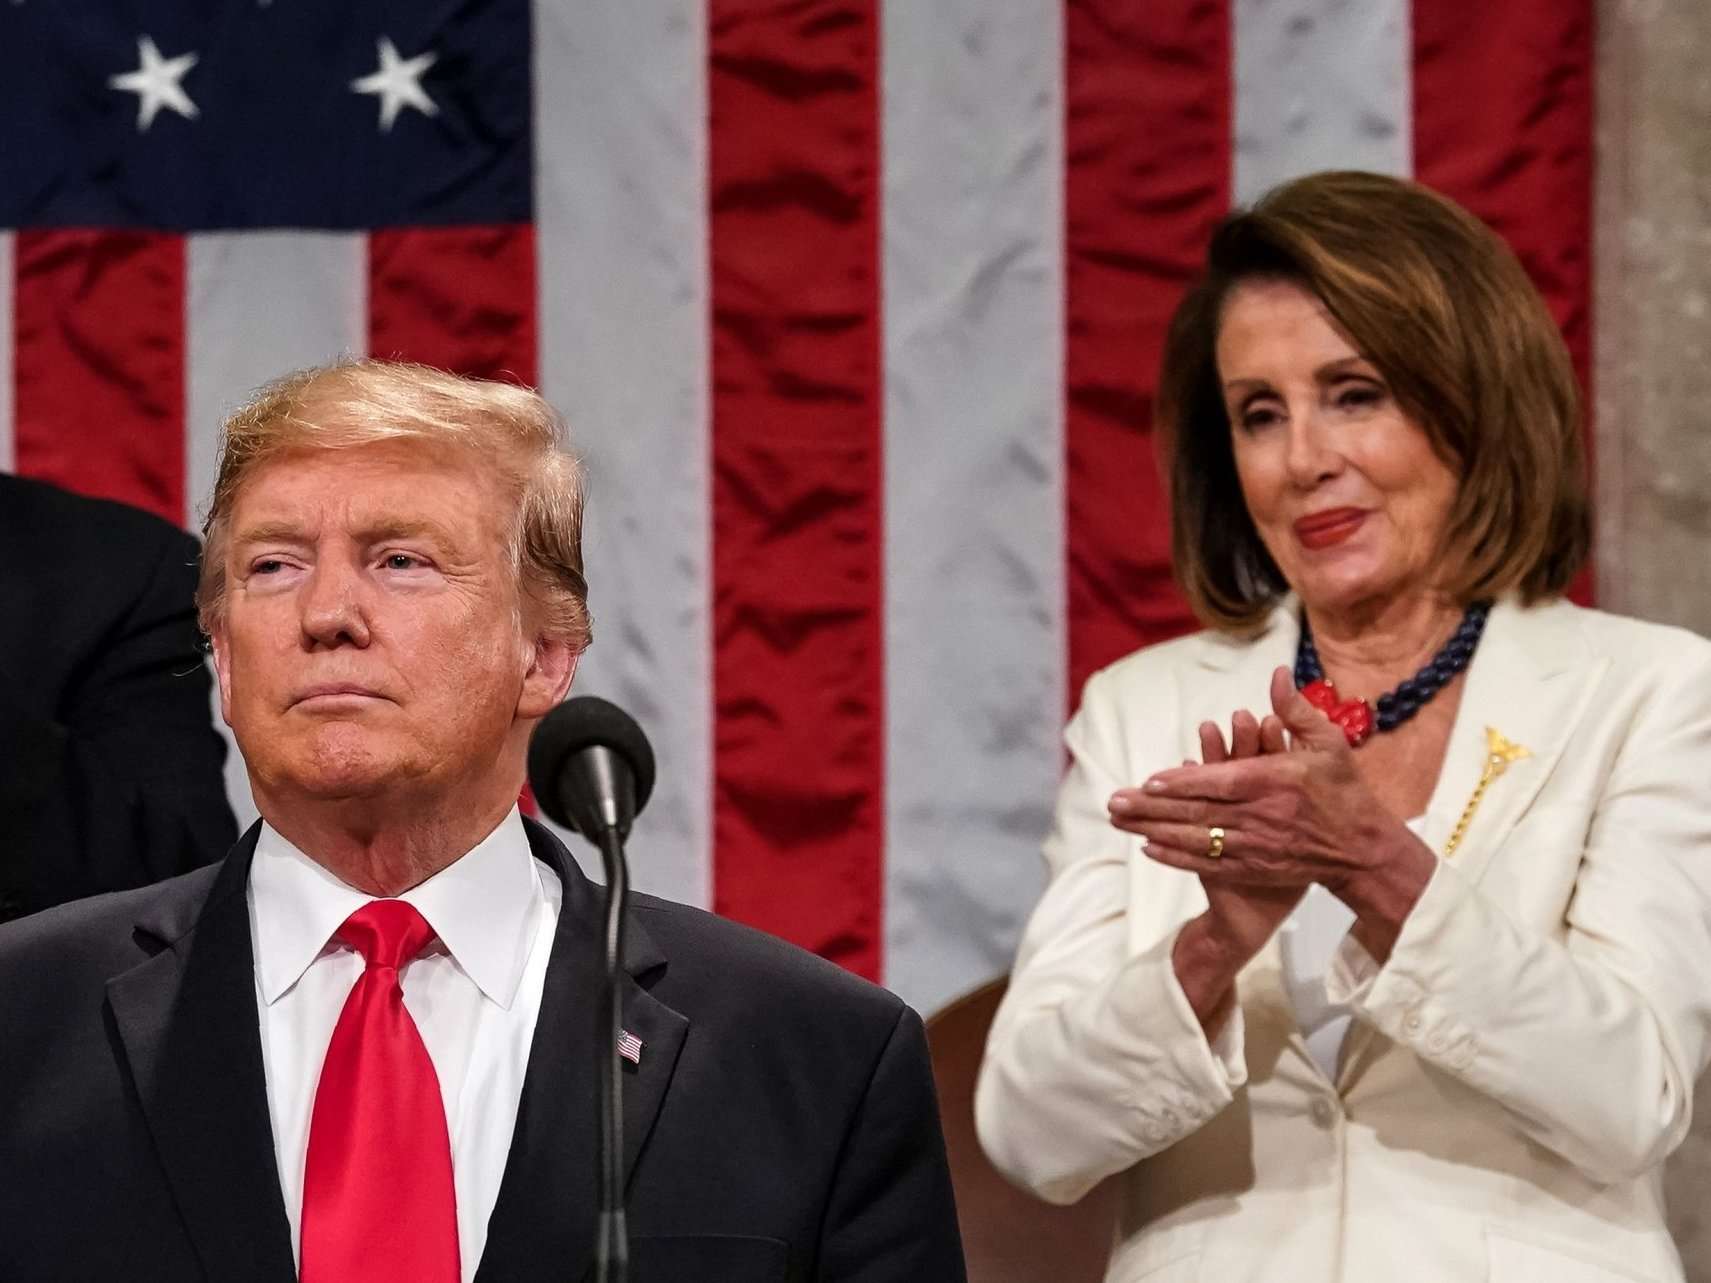 image for Nancy Pelosi fears Trump won't leave White House if he loses 2020 election by small margin